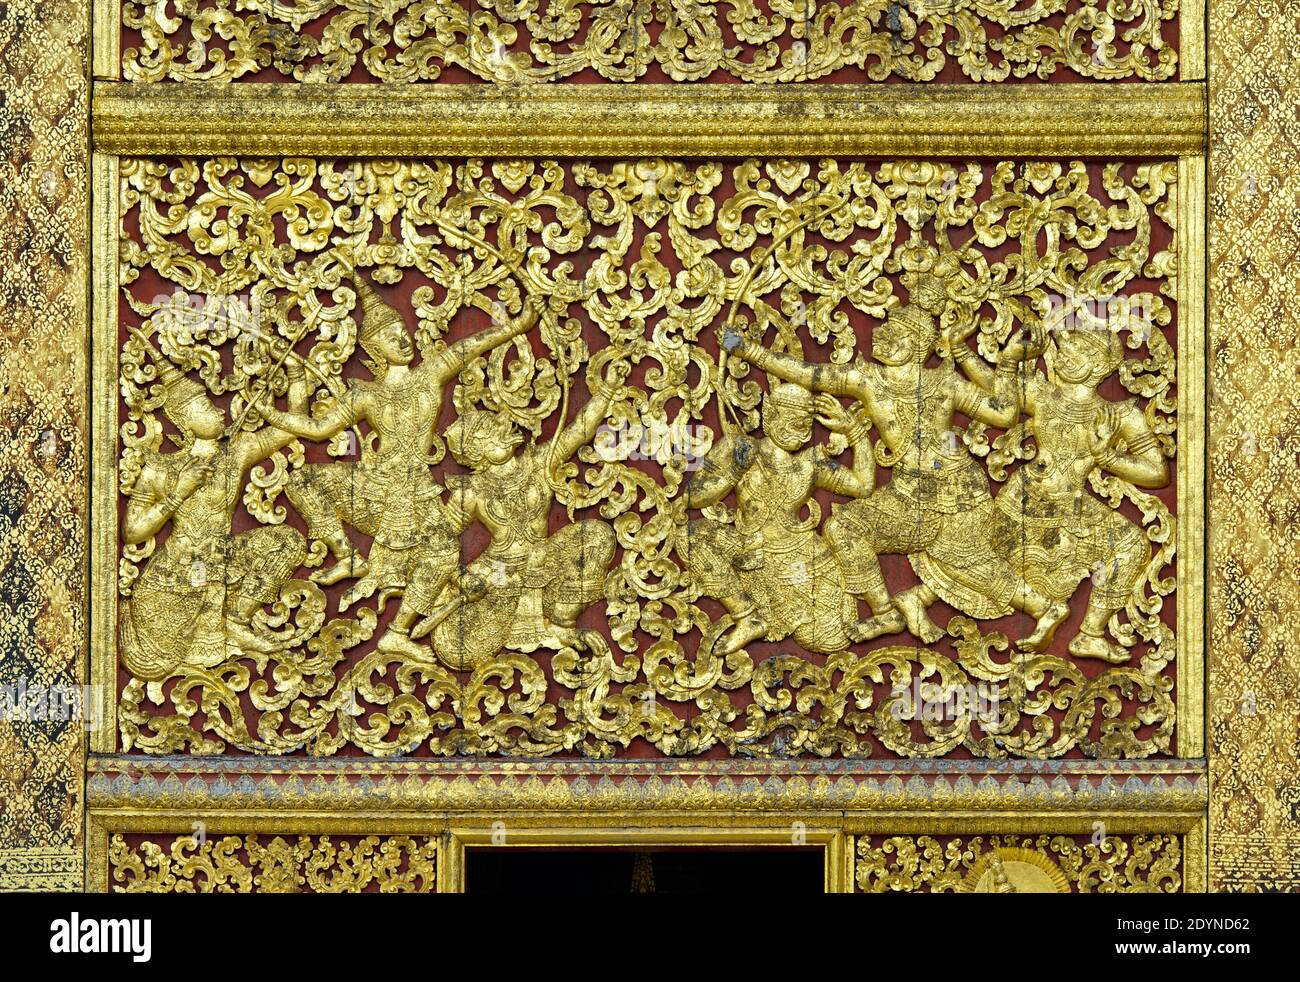 Gilded teak wood panels with rich floral carvings, Royal Funerary Carriage house, Temple Wat Xieng Thong, Luang Prabang, Laos Stock Photo